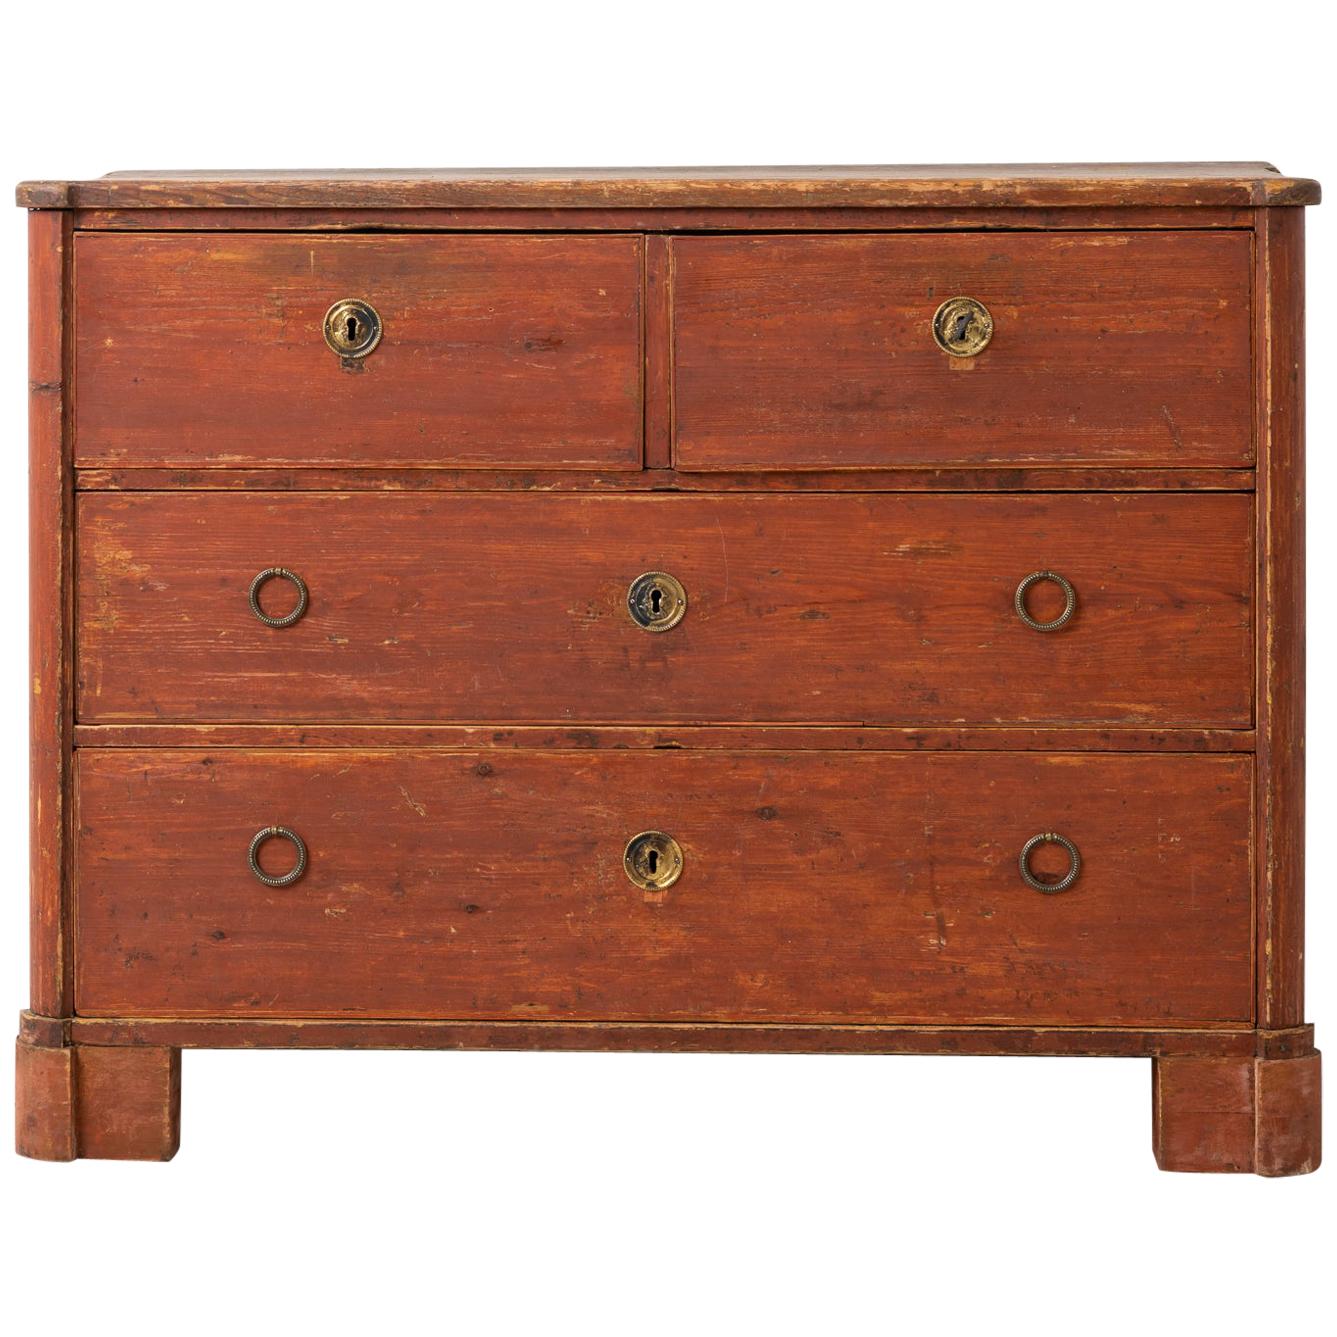 Low Swedish Gustavian Chest of Drawers